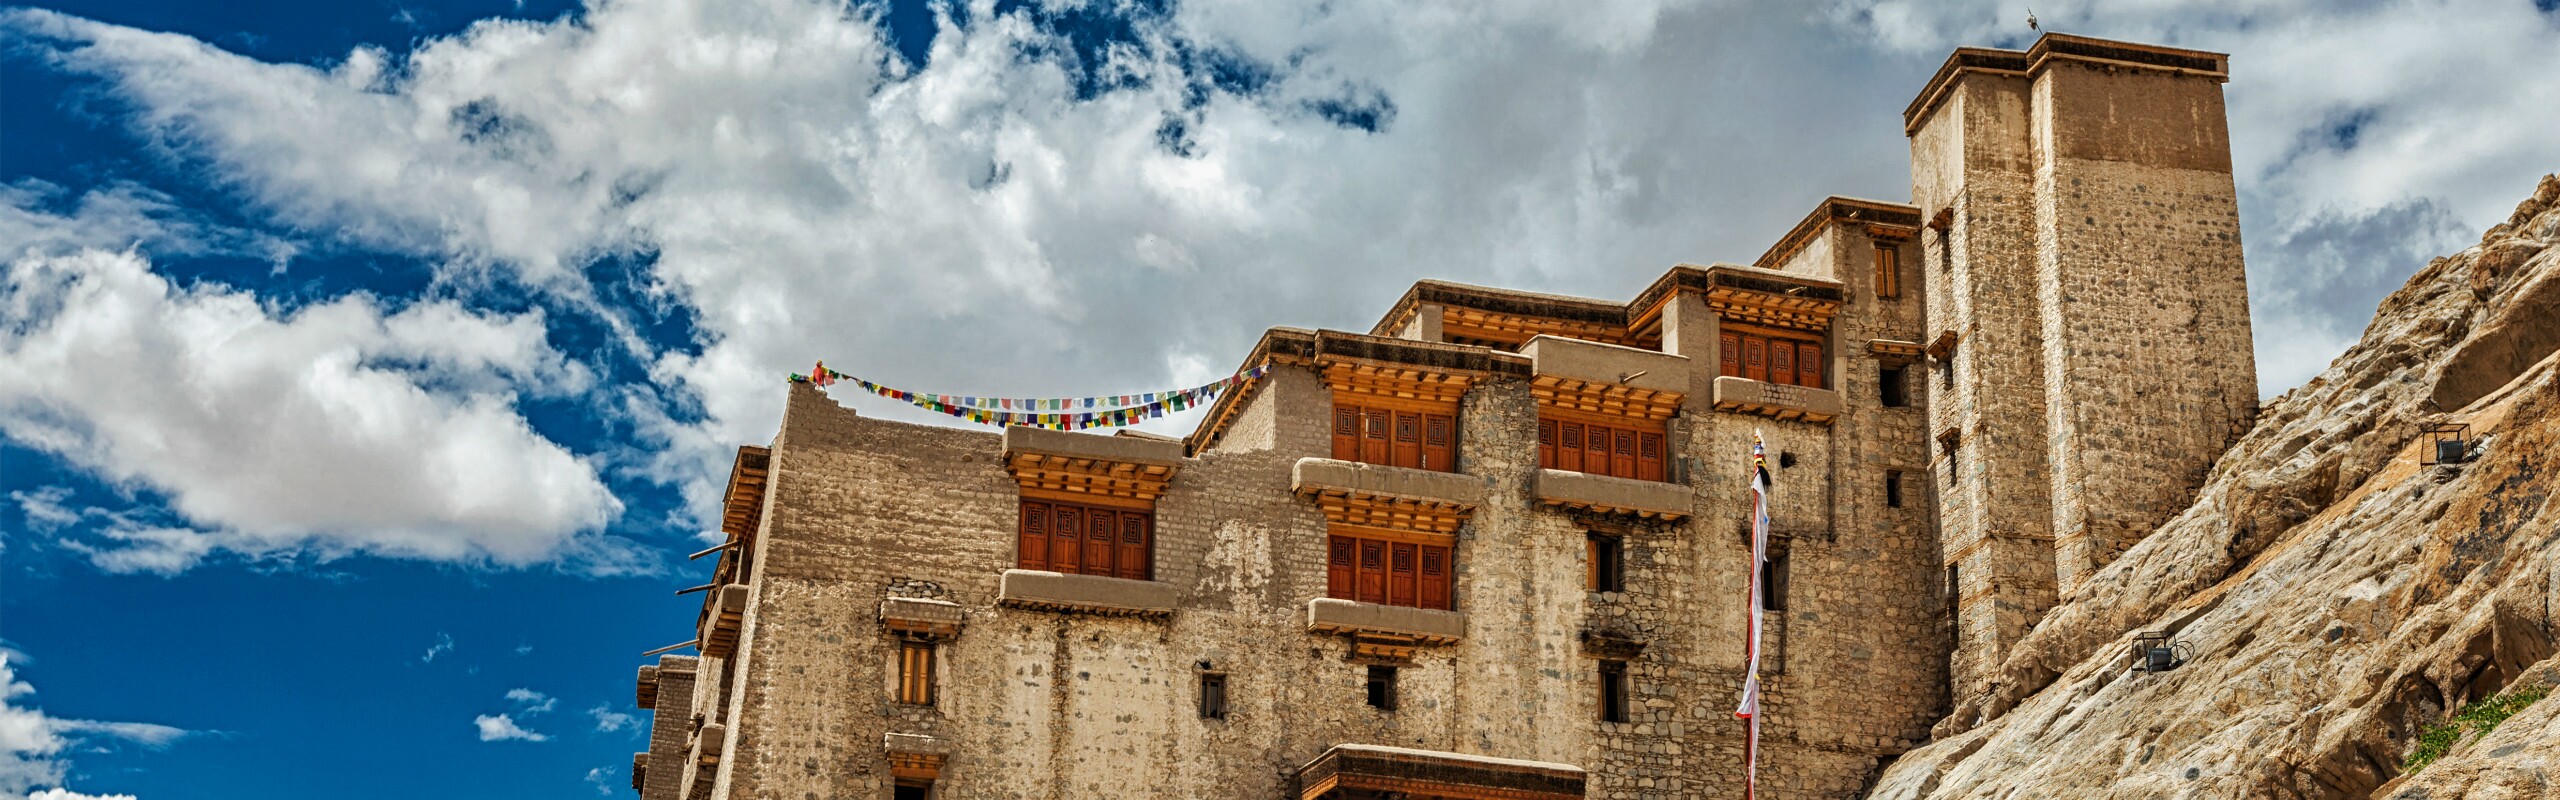 Top 20 Things to do in Ladakh